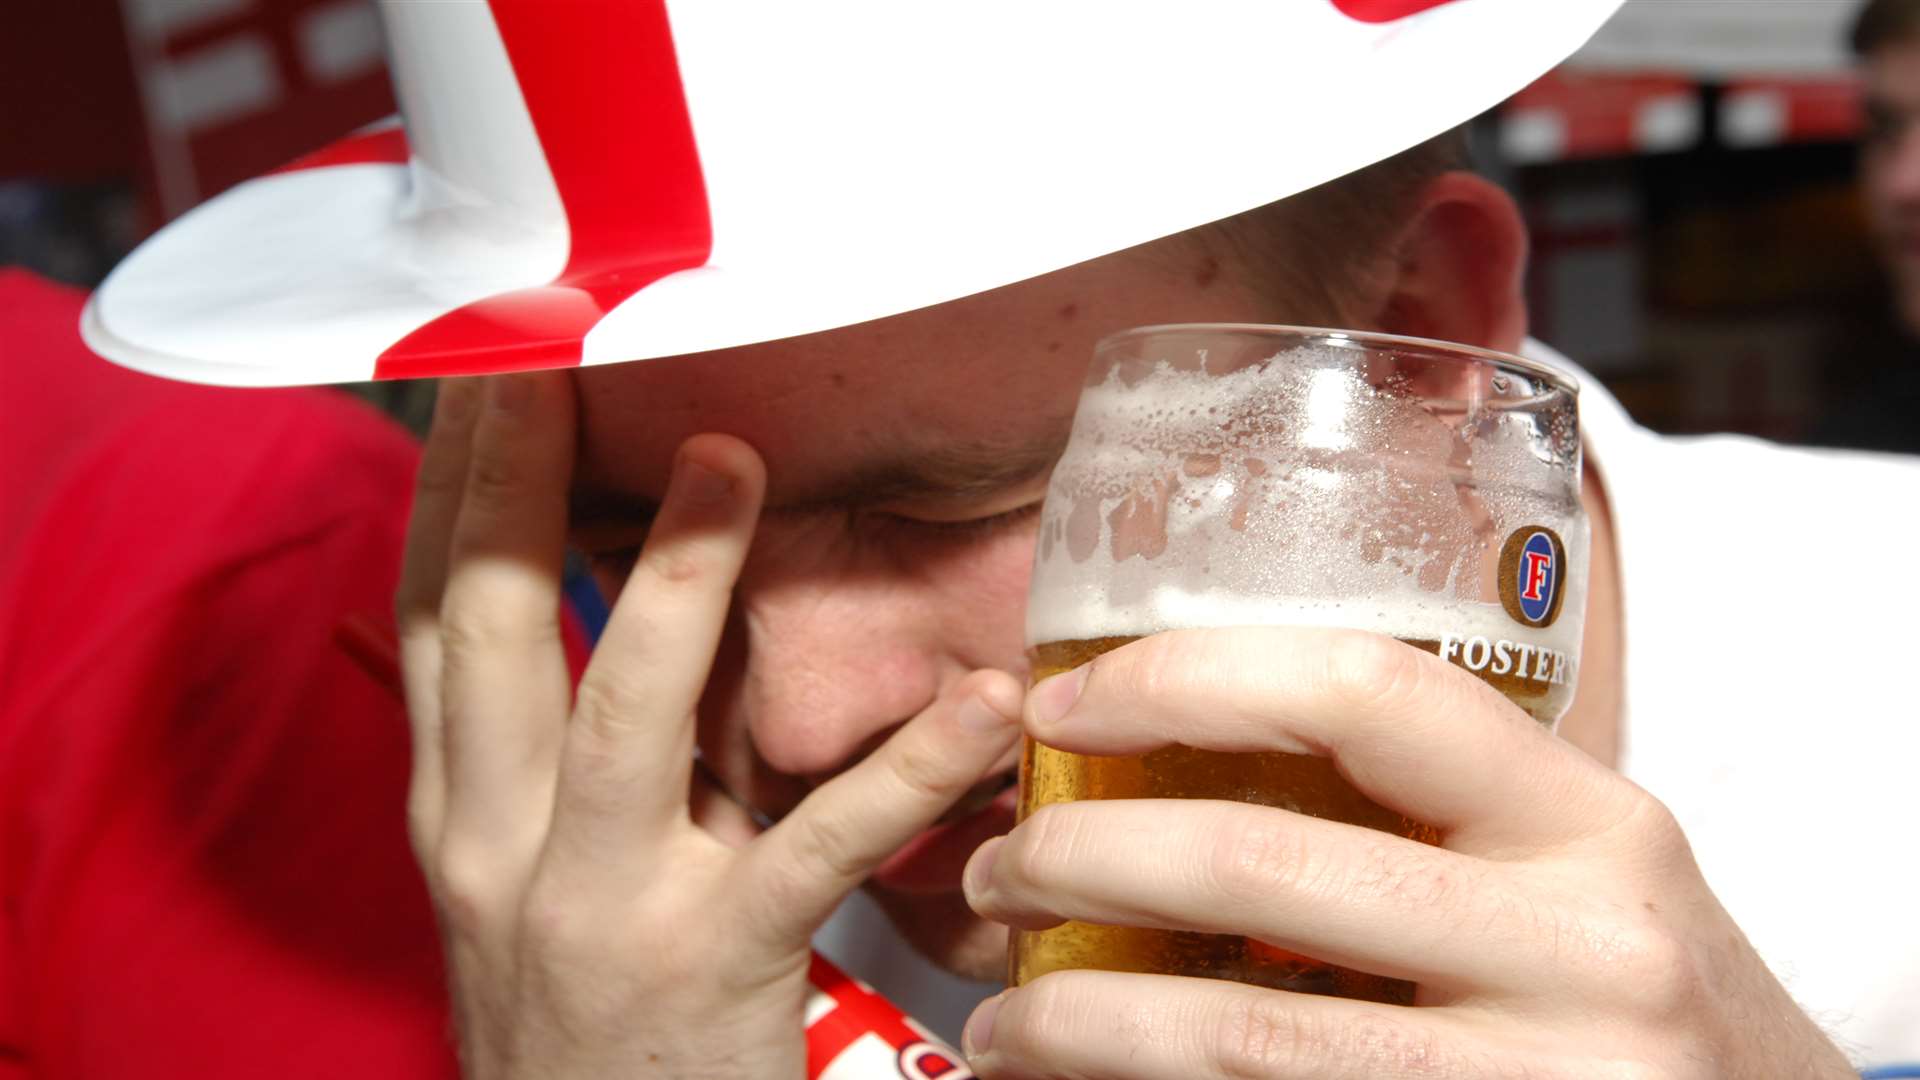 England fans have been left in despair again